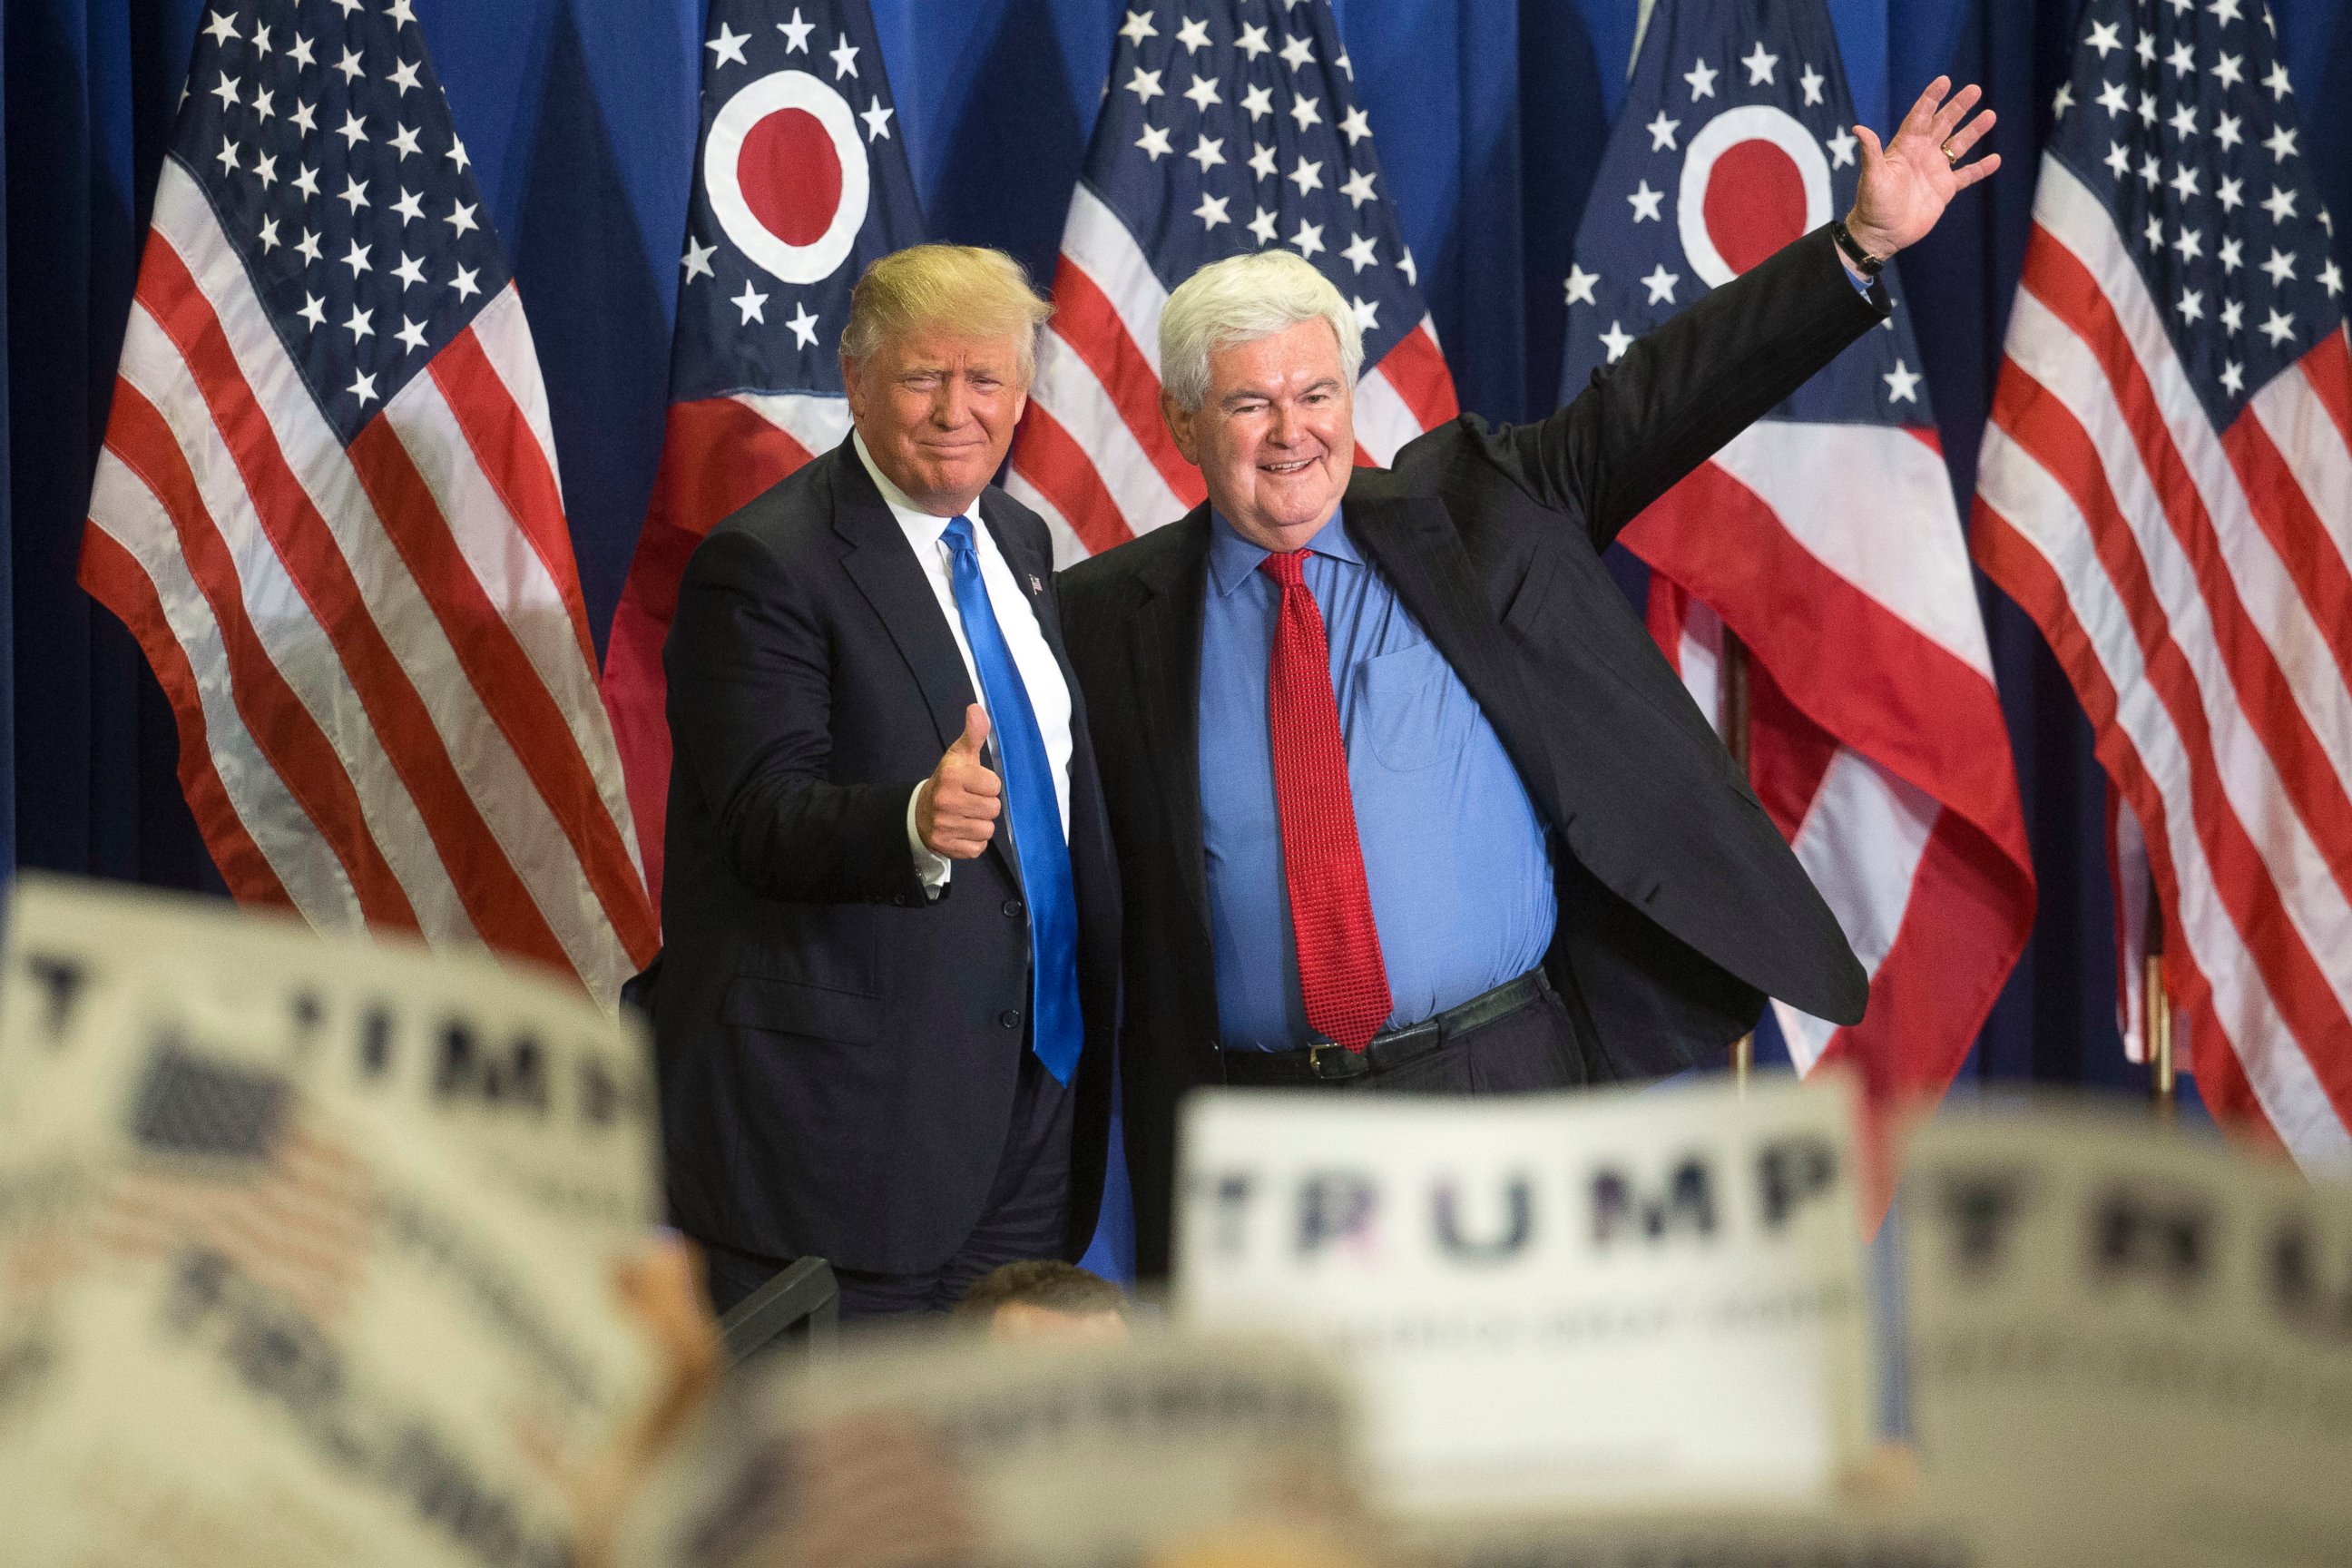 PHOTO: Republican presidential candidate Donald Trump, left, and former House Speaker Newt Gingrich, right, acknowledge the crowd during a campaign rally at the Sharonville Convention Center, July 6, 2016, in Cincinnati.